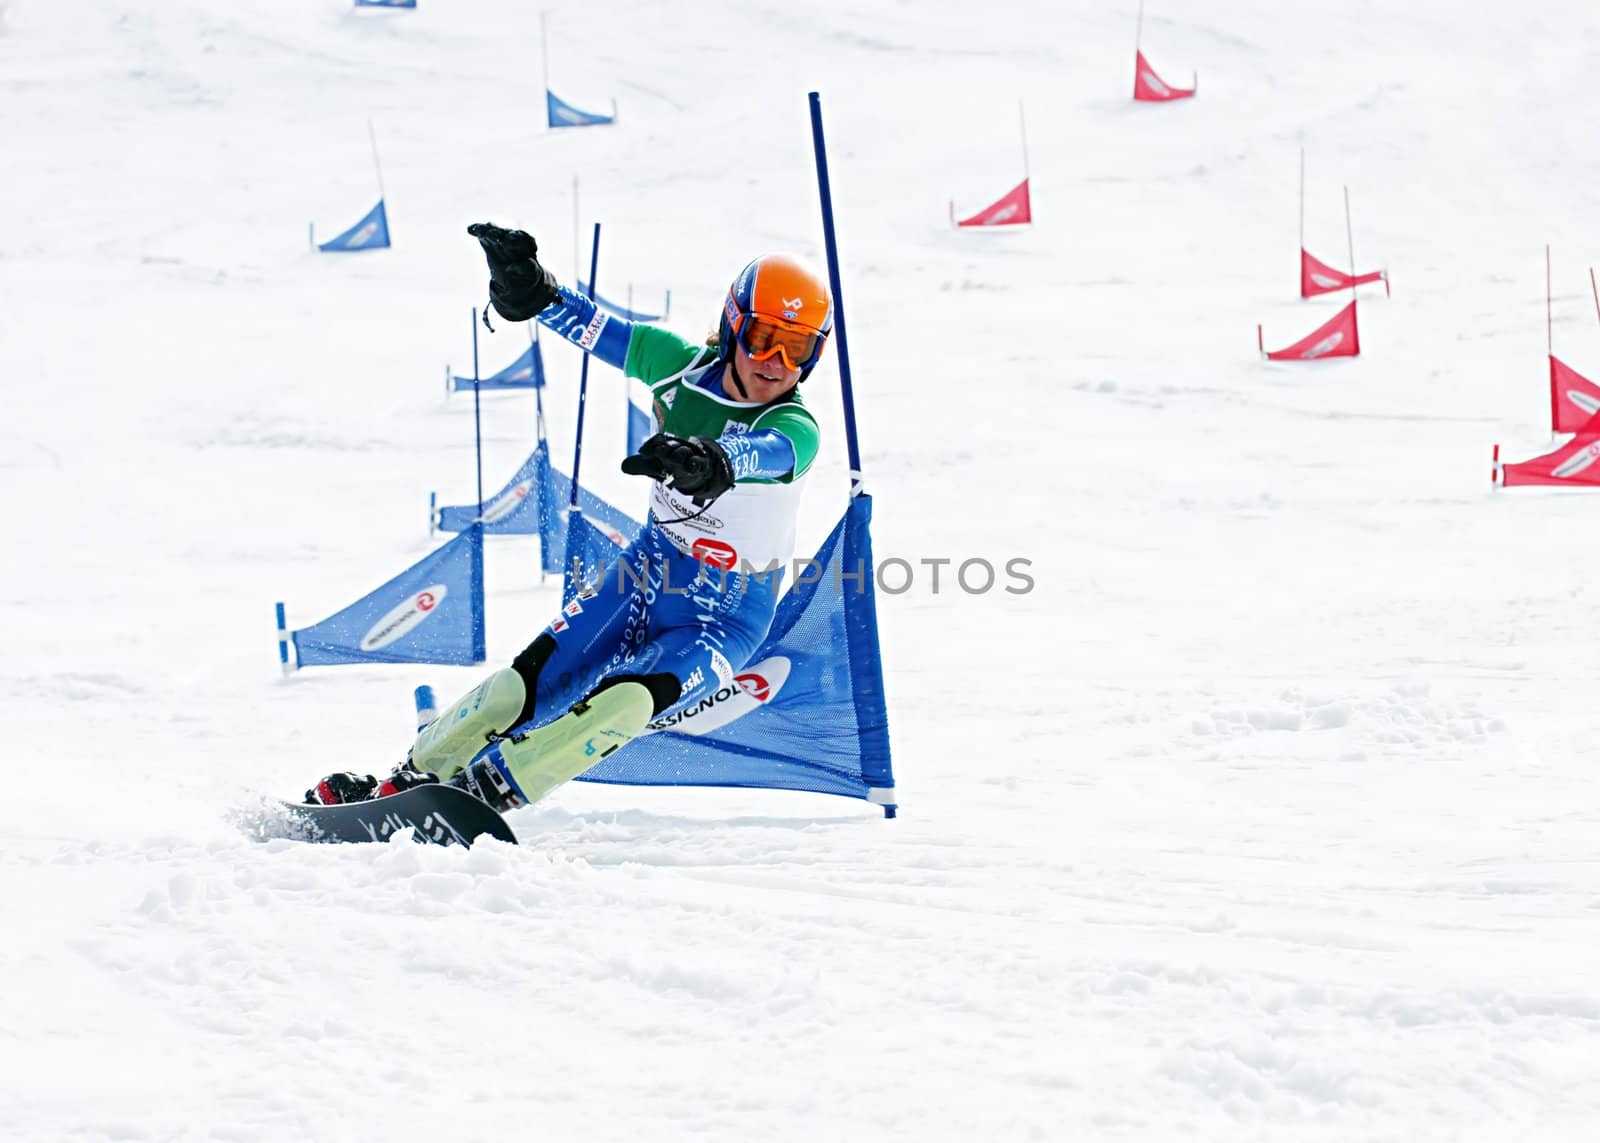 KIEV, UKRAINE - MARCH 4, 2007: A participant in action during Snowboard European Cup: full throttle on March 4, 2007 in Kiev, Ukraine